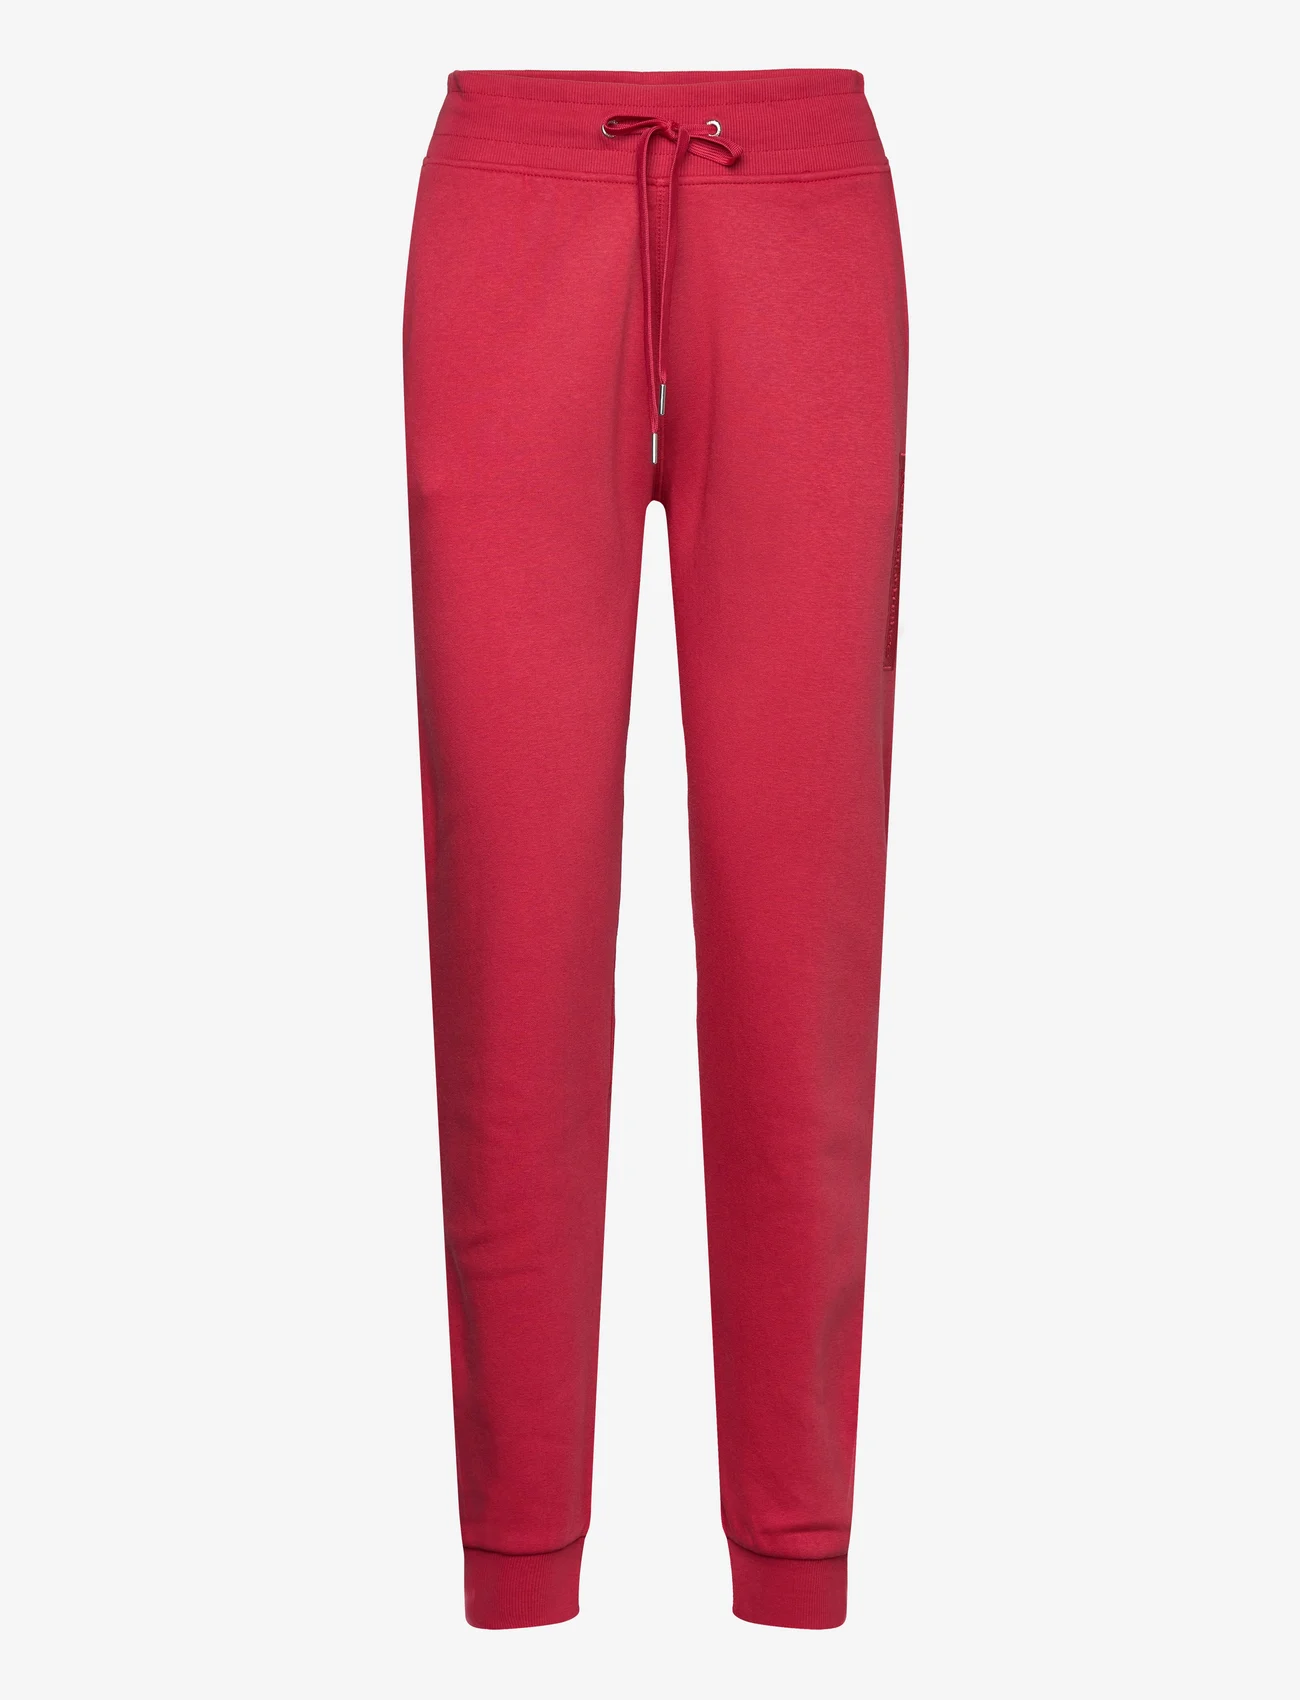 Peak Performance - W Ease Pant - softer red - 0